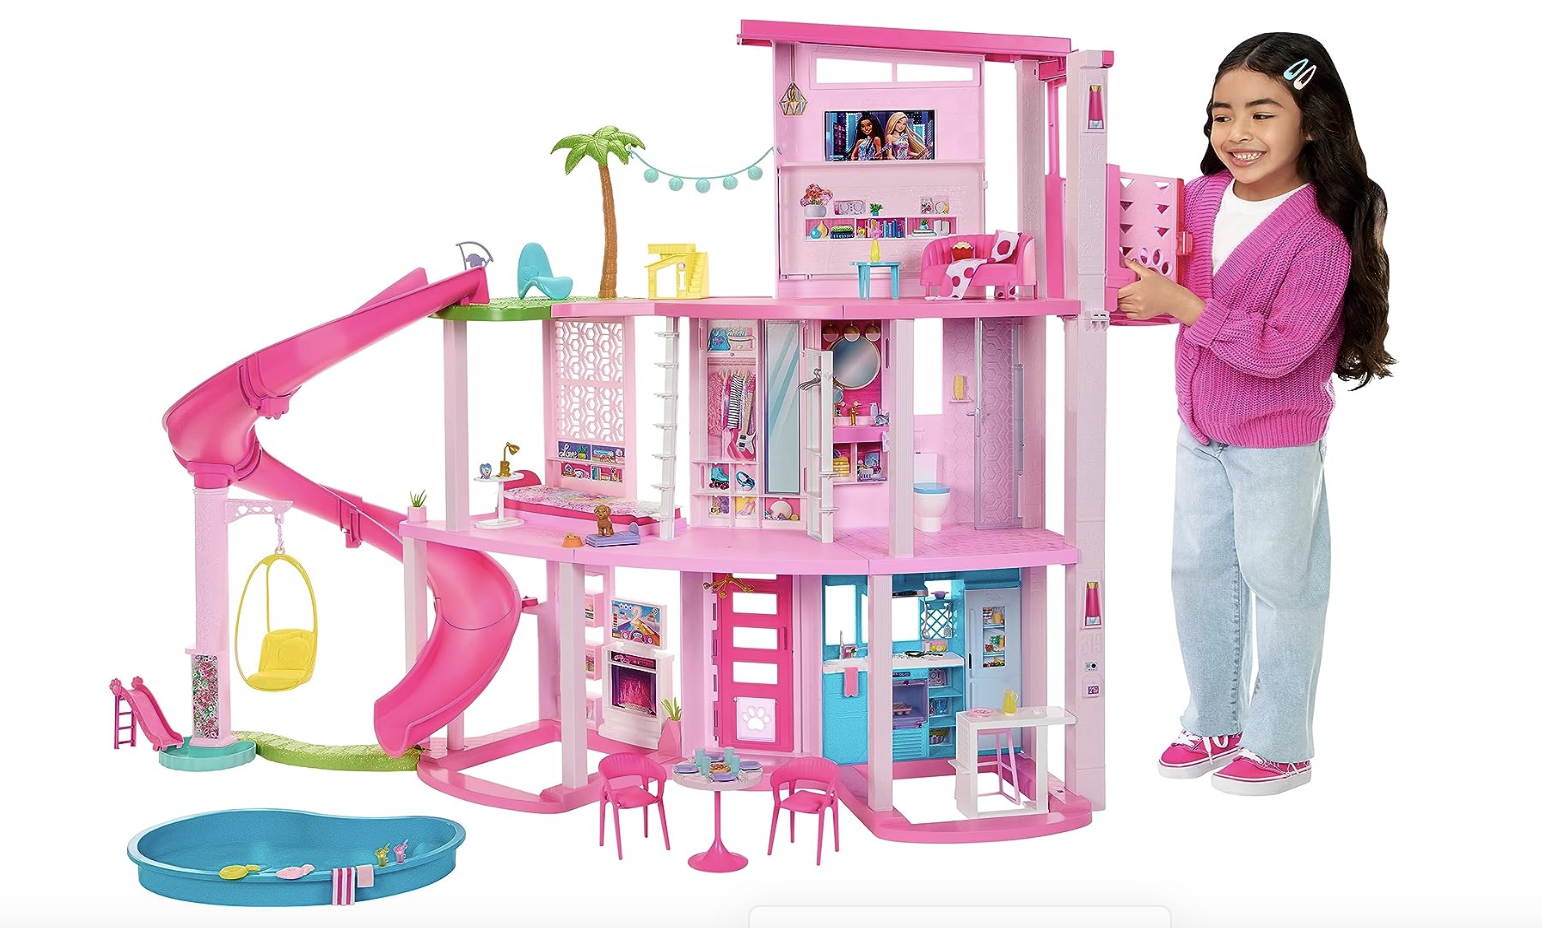 Dream Fun Toys for 8 9 10 Year Old Girls Kids, Educational Toys